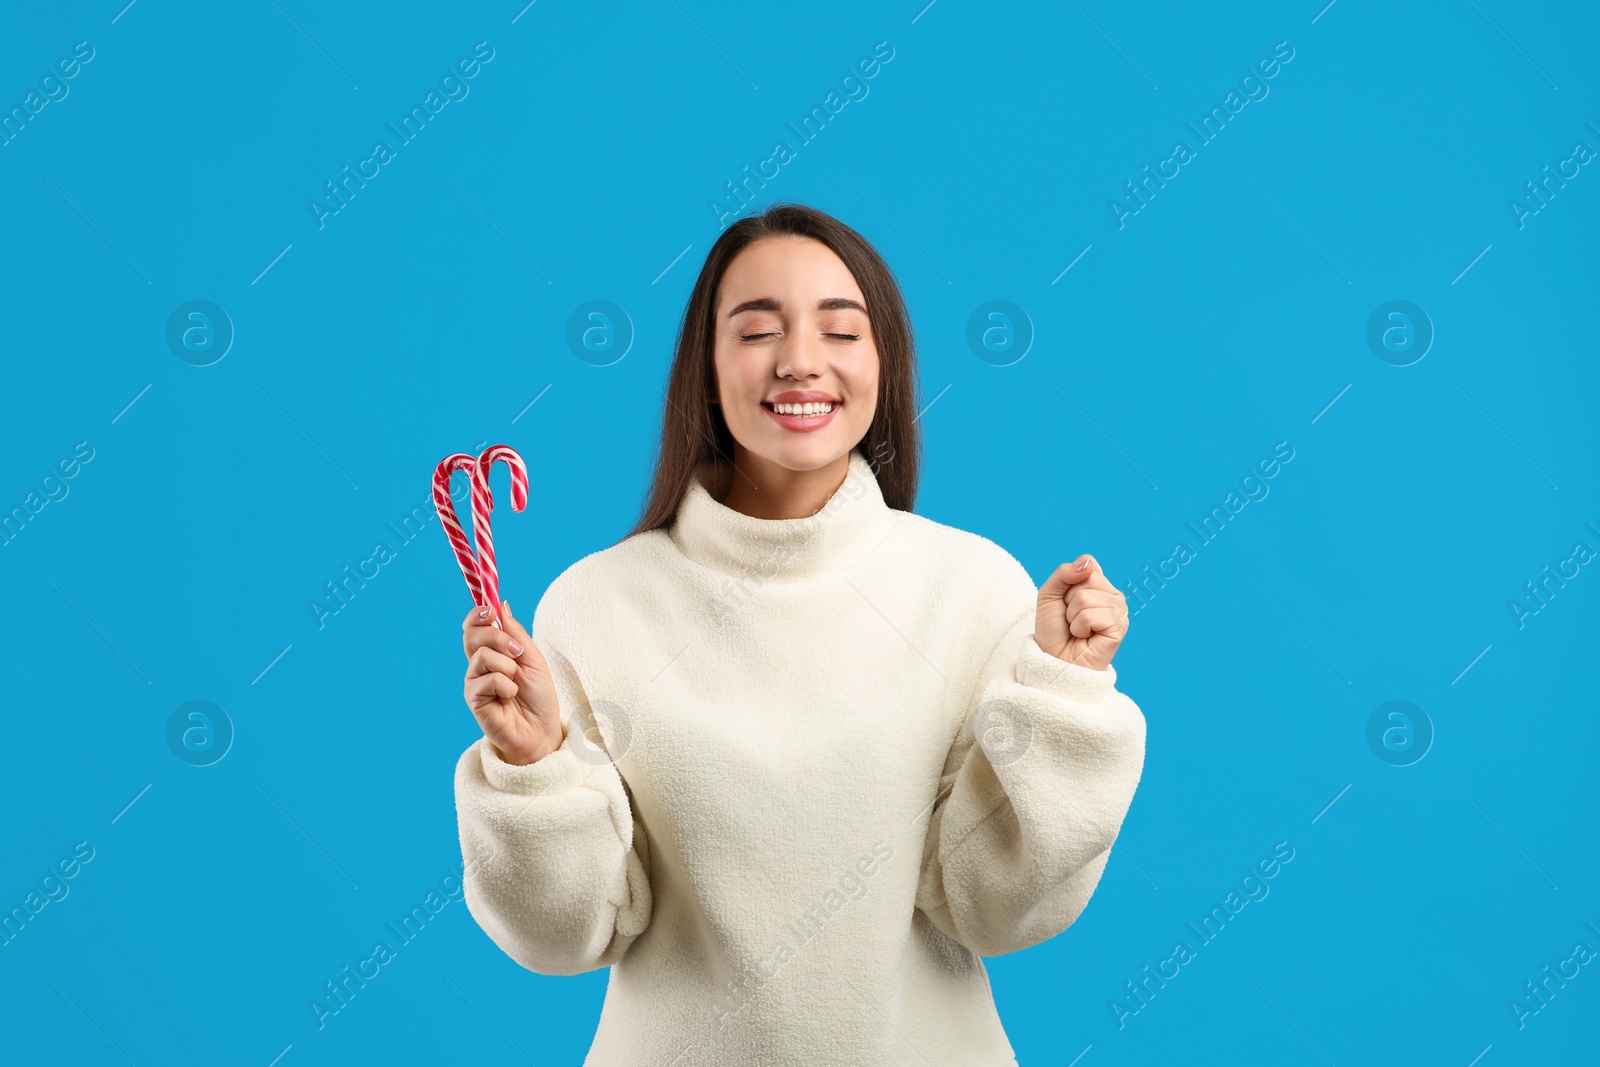 Photo of Young woman in beige sweater holding candy canes on blue background. Celebrating Christmas